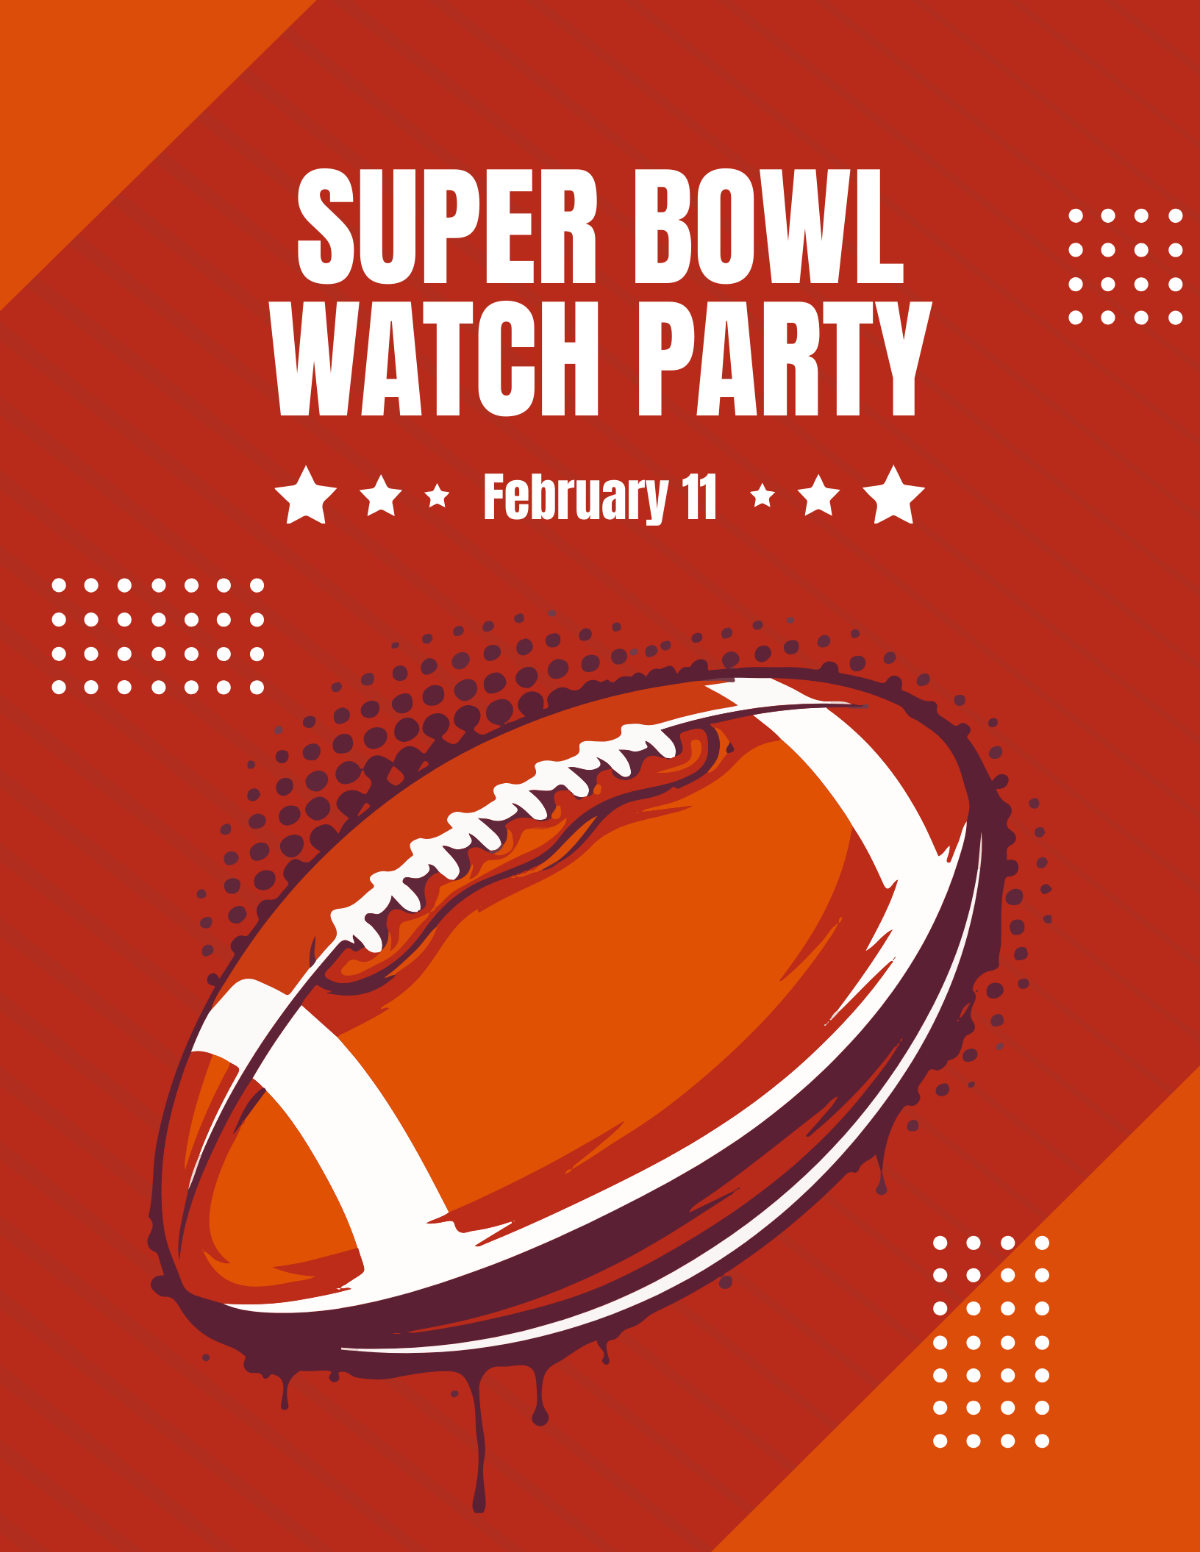 Super Bowl Watch Party Flyer Template